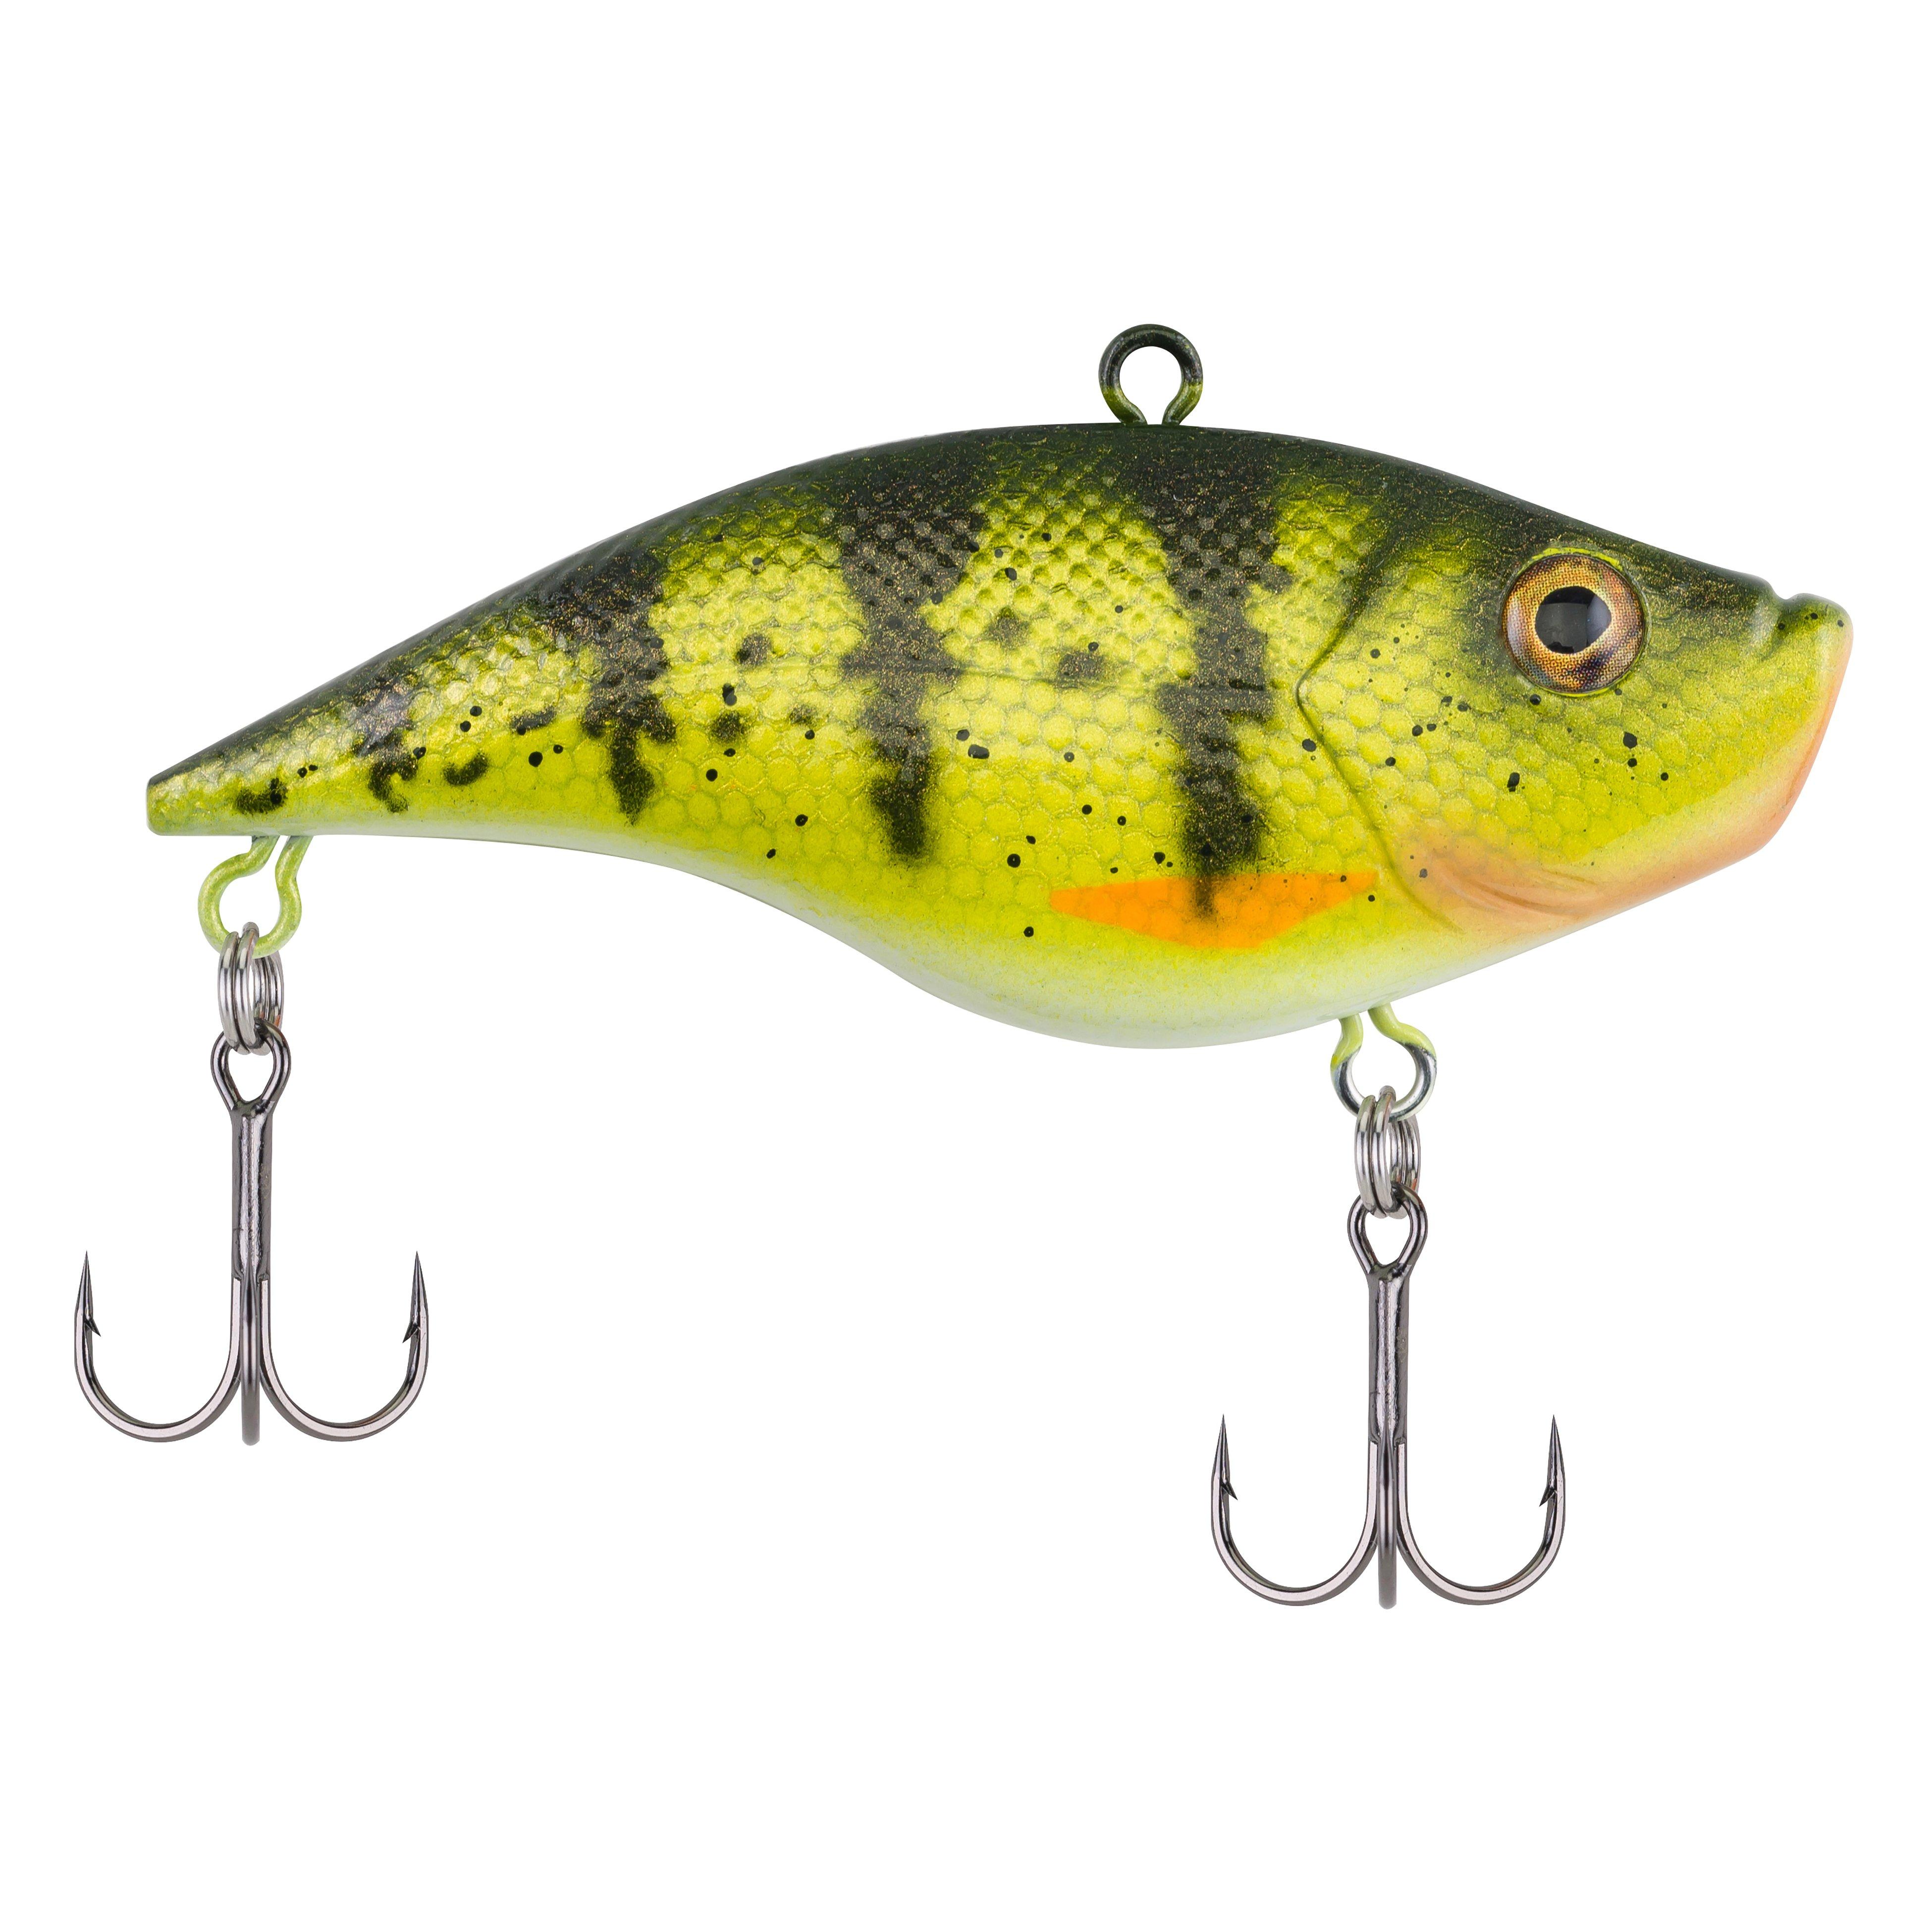 ~20 Adjustable 3 Part 2" Display Stand Fishing lure 